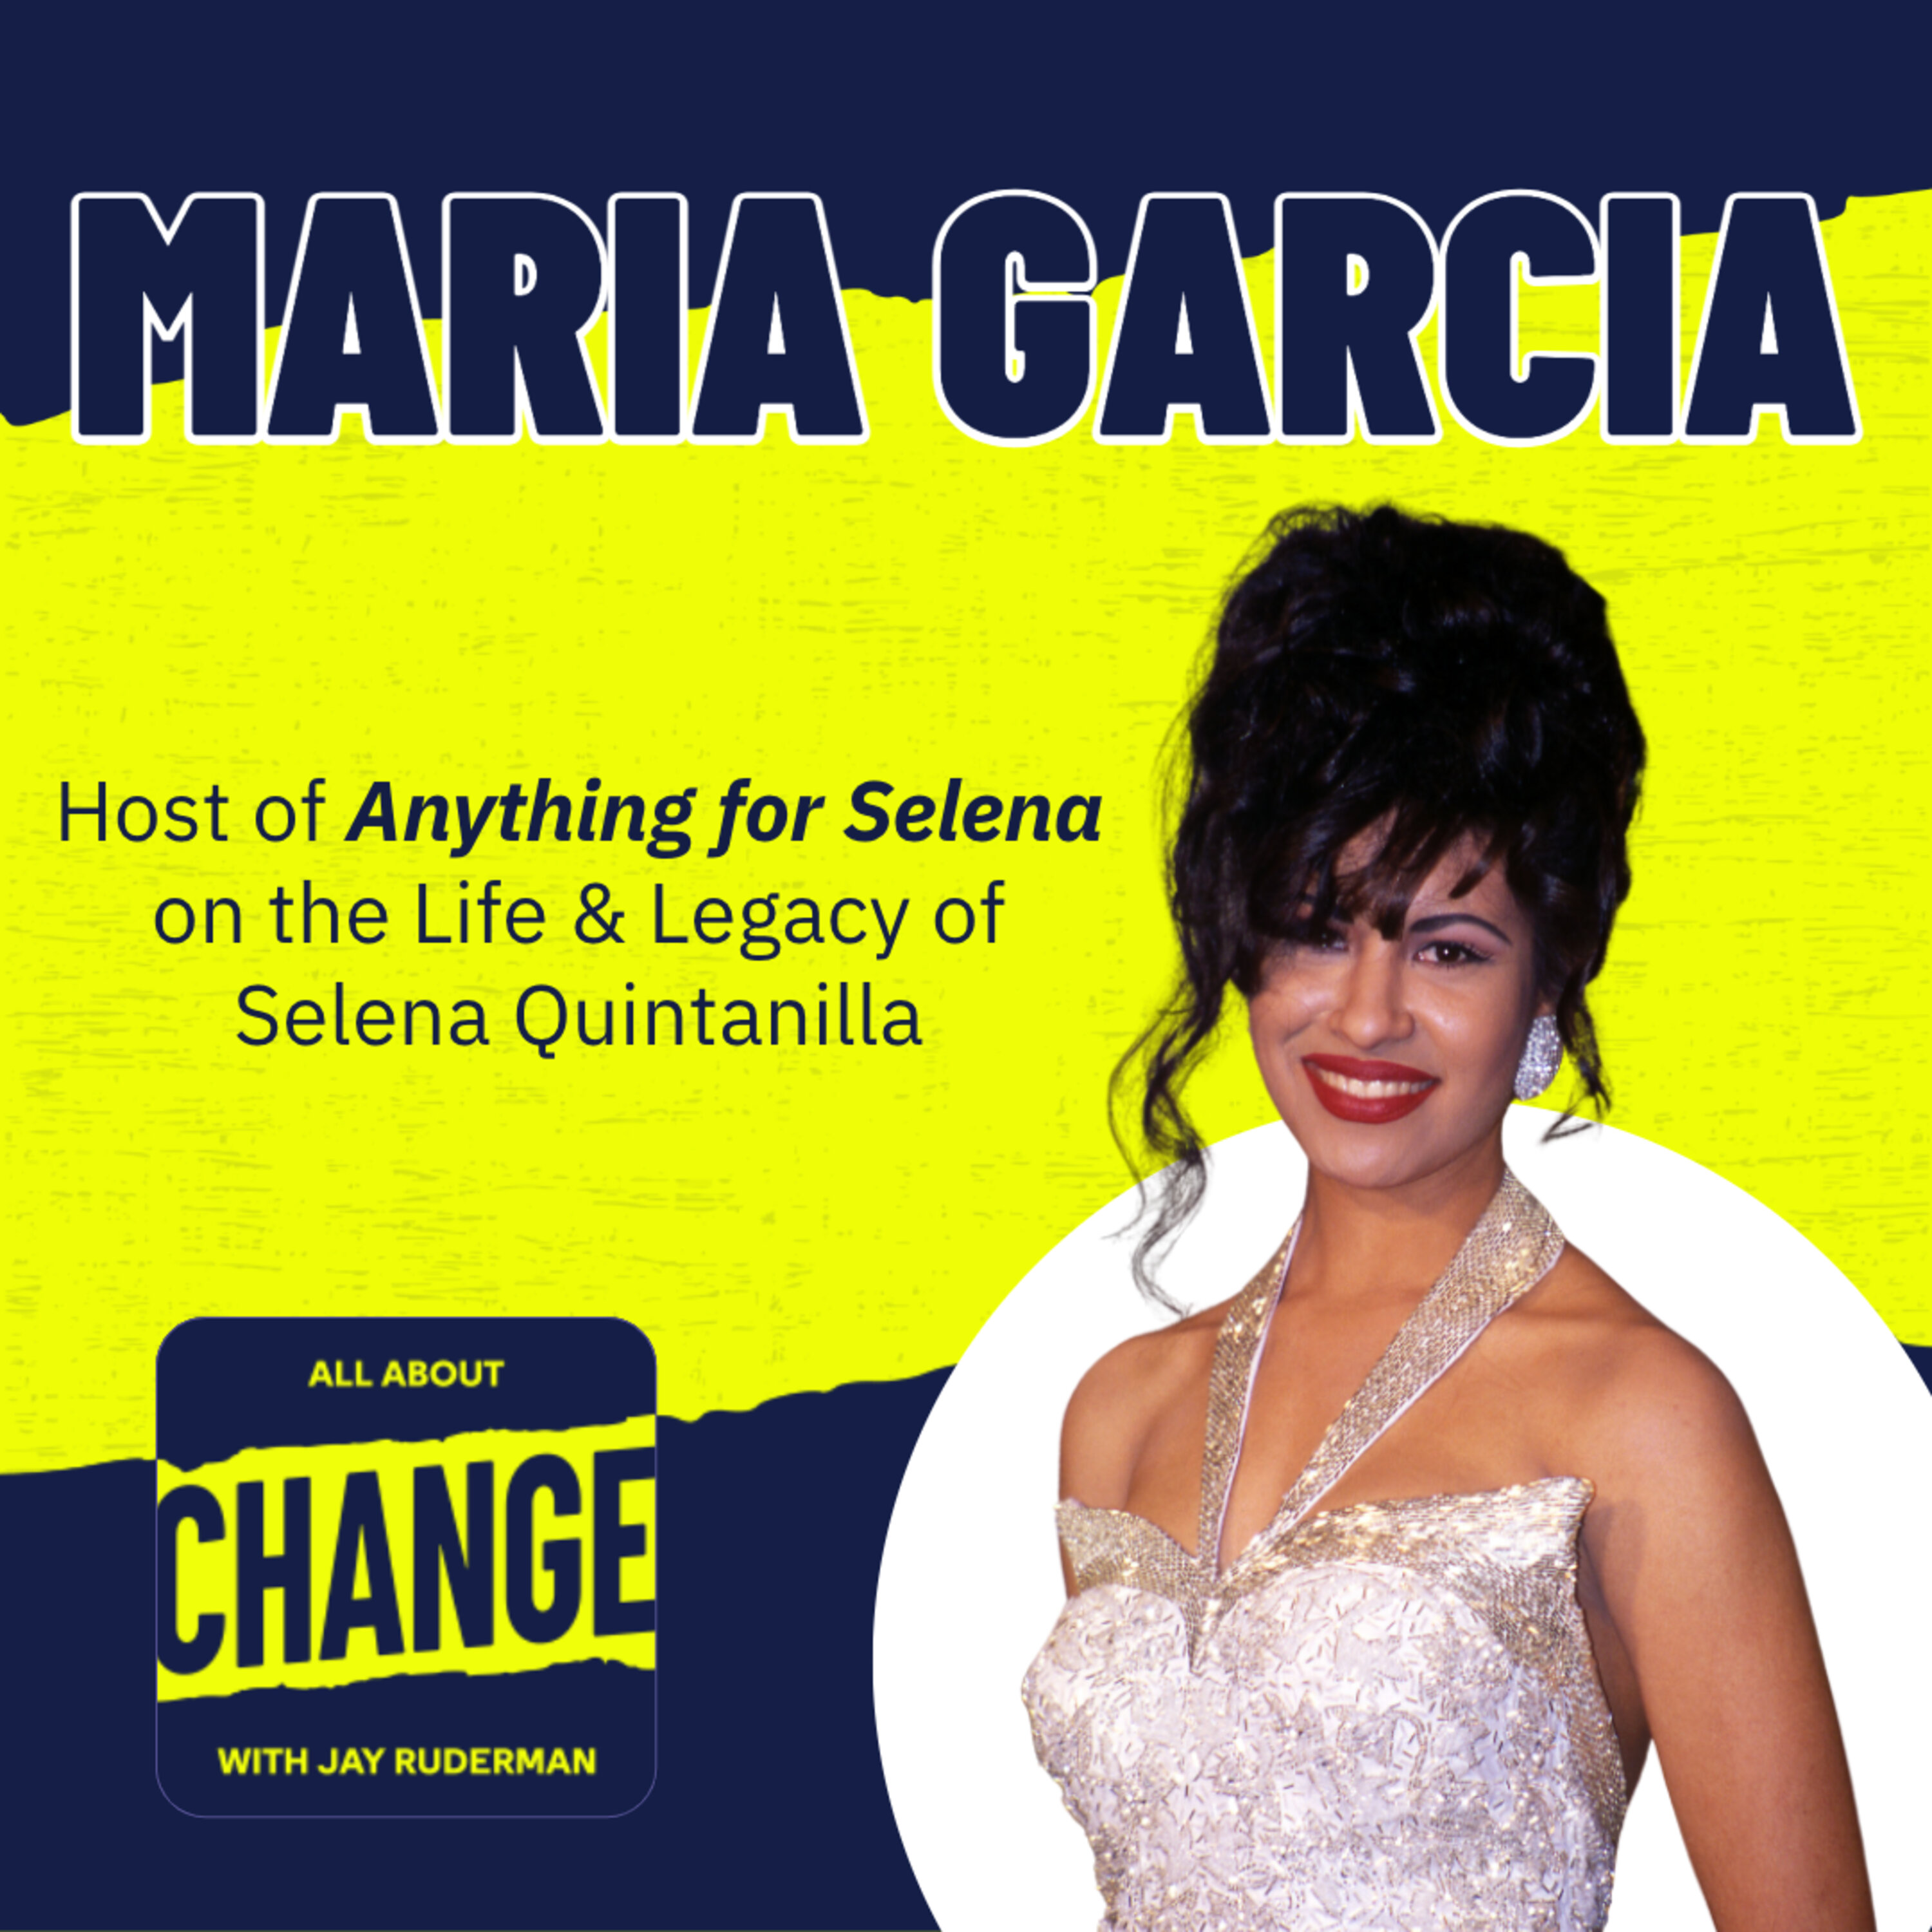 Maria Garcia - Host of Anything for Selena on the Life & Legacy of Selena Quintanilla